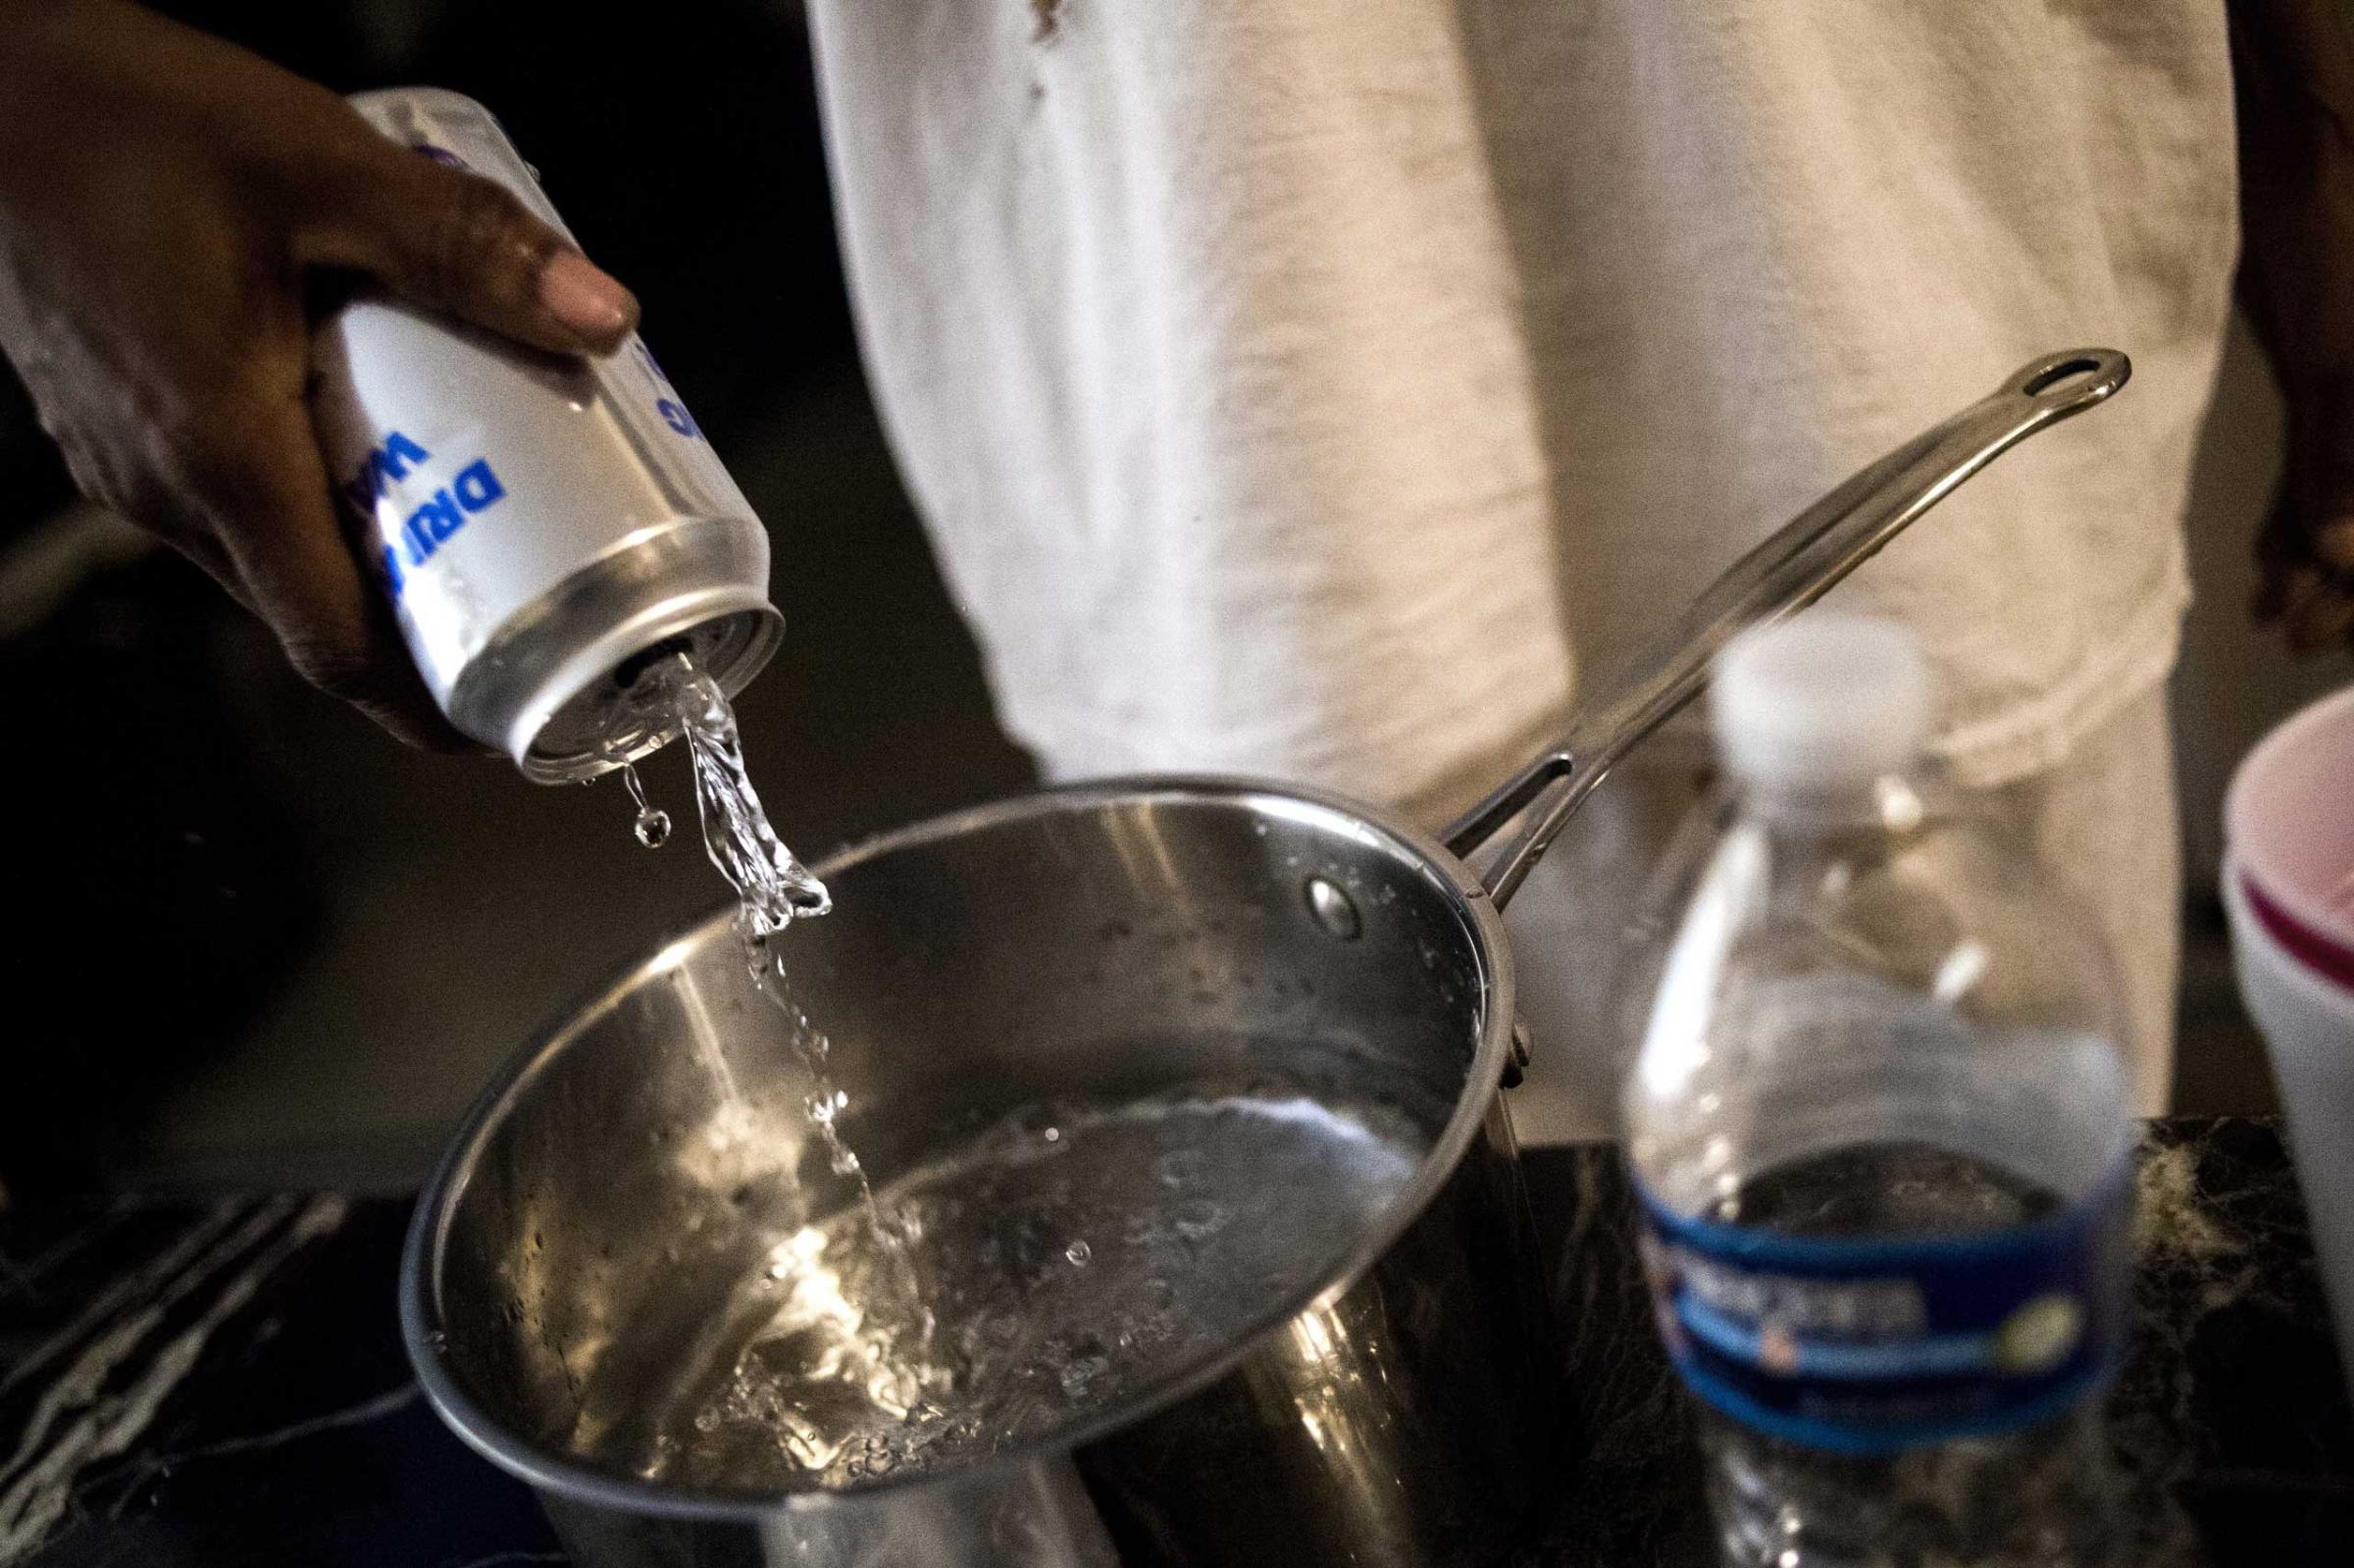 Flint resident Lorraine Jones pours canned water into a pot in preparation for boiling to cook on Jan. 19, 2016, at River Park Apartments in Flint, Mich. After weeks without water being distributed, the residents are finally getting bottled water delivered to their doorsteps for the first time Tuesday as four Flint Housing Commission workers shuttled cases of water throughout the community.